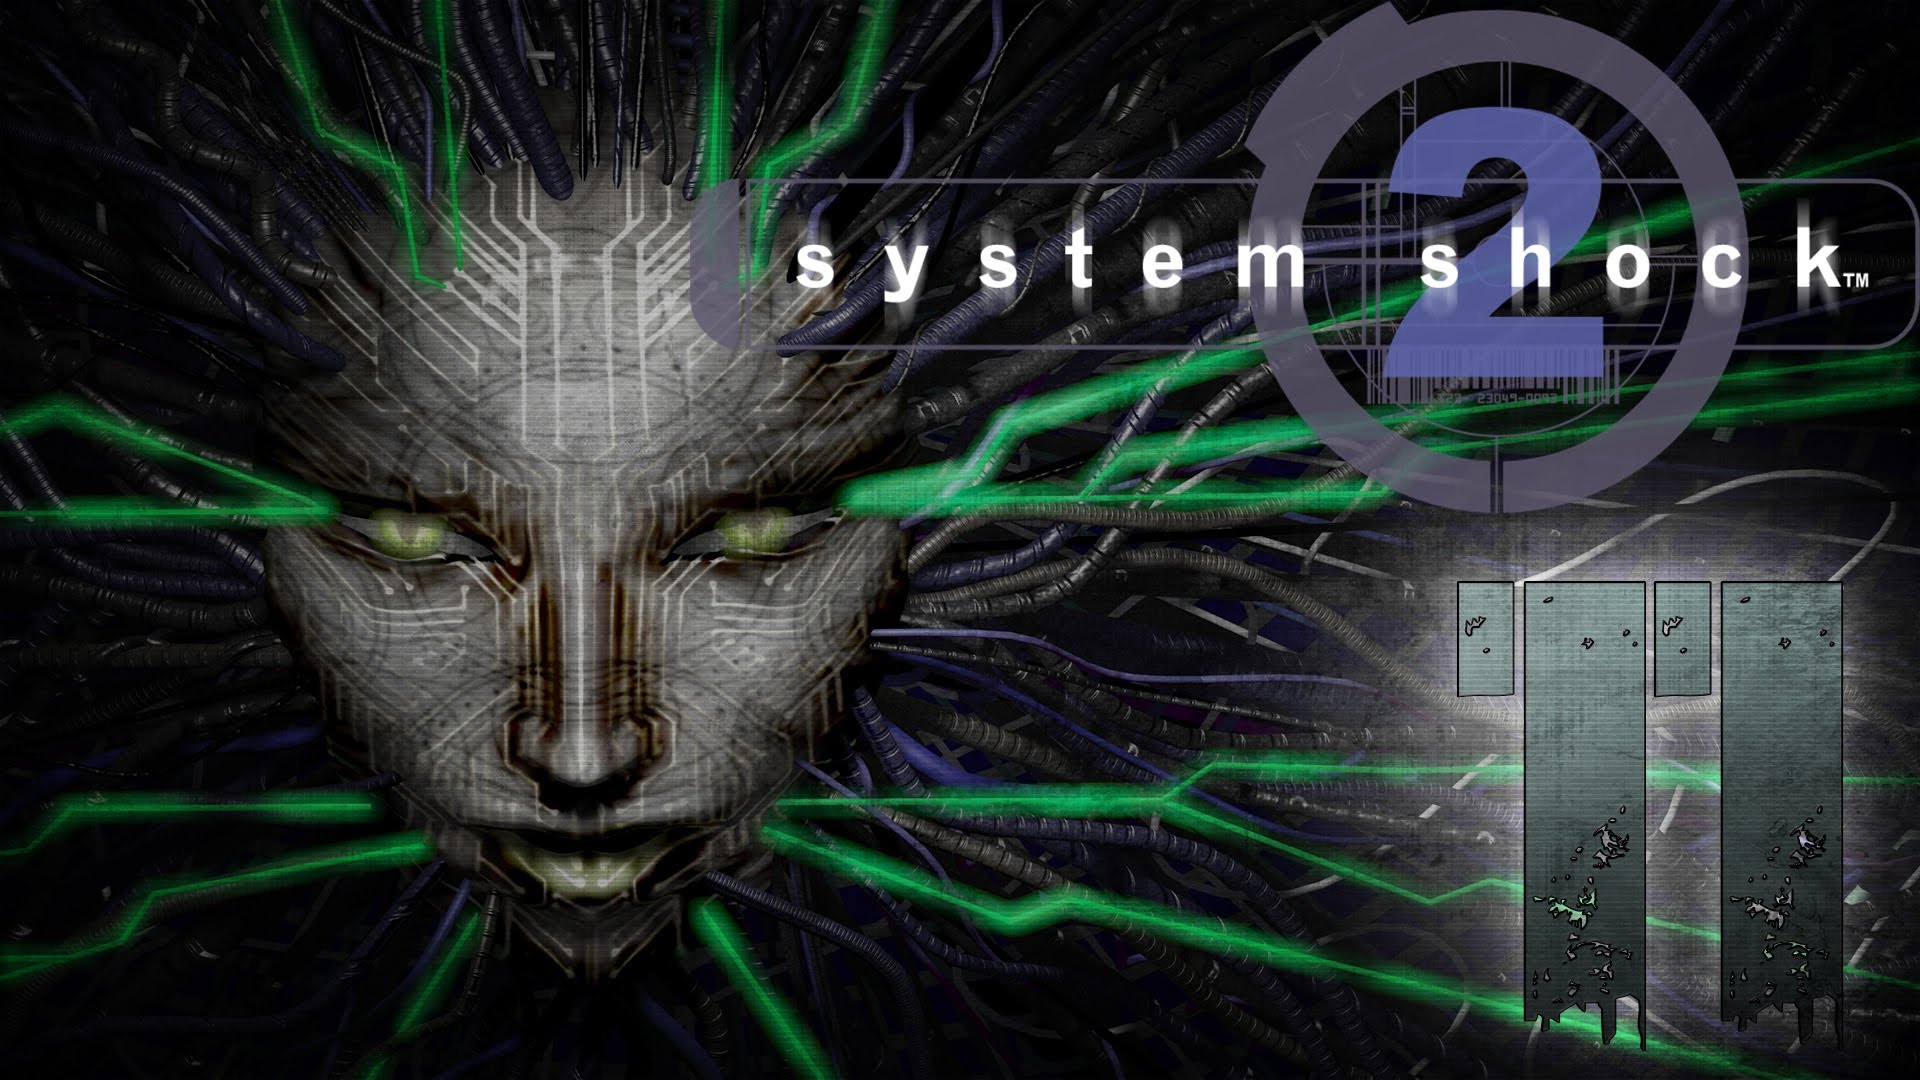 System Shock 2 Backgrounds, Compatible - PC, Mobile, Gadgets| 1920x1080 px